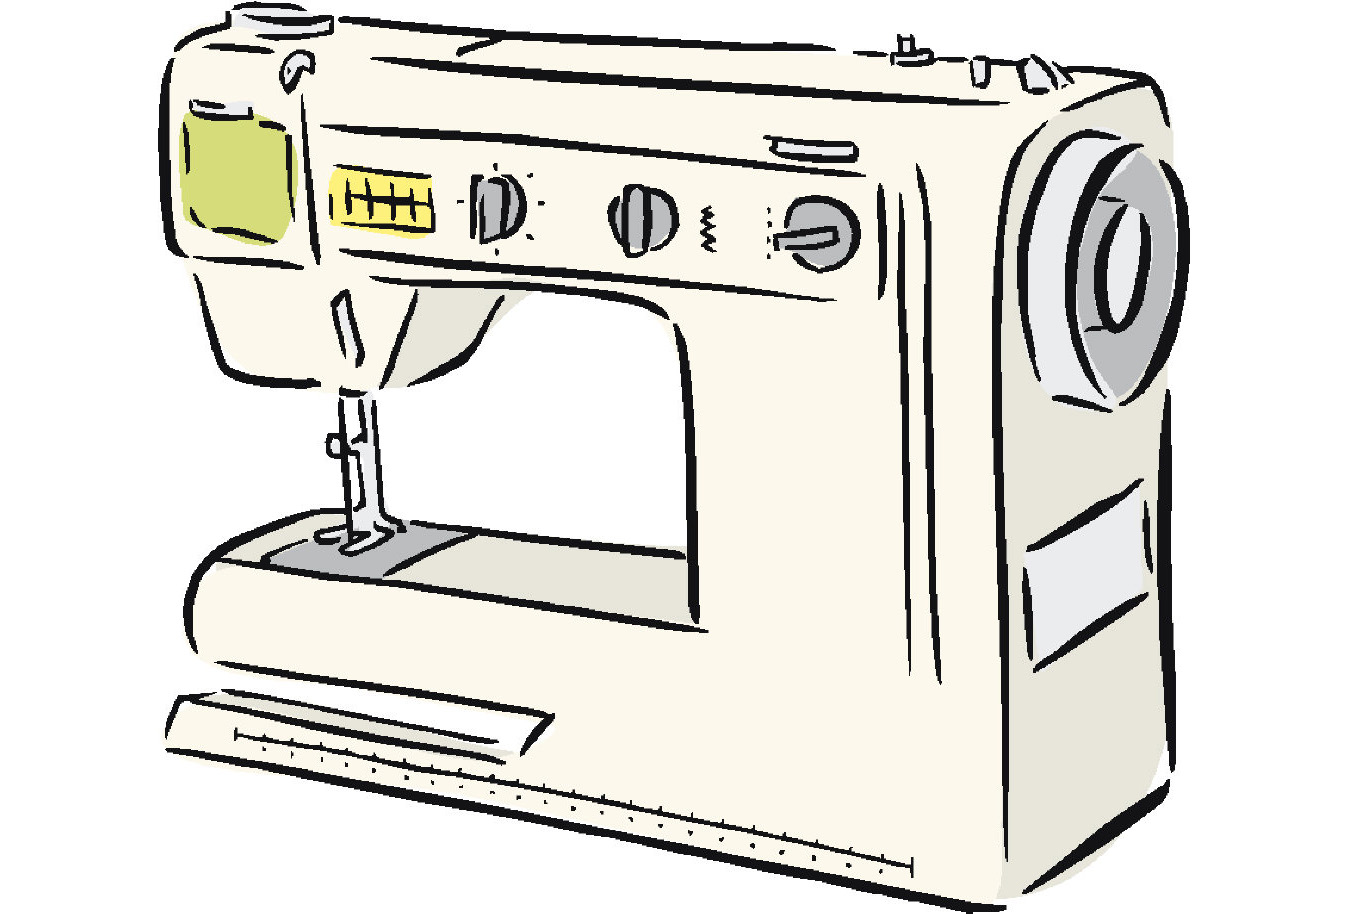 Download this Sewing Machine picture